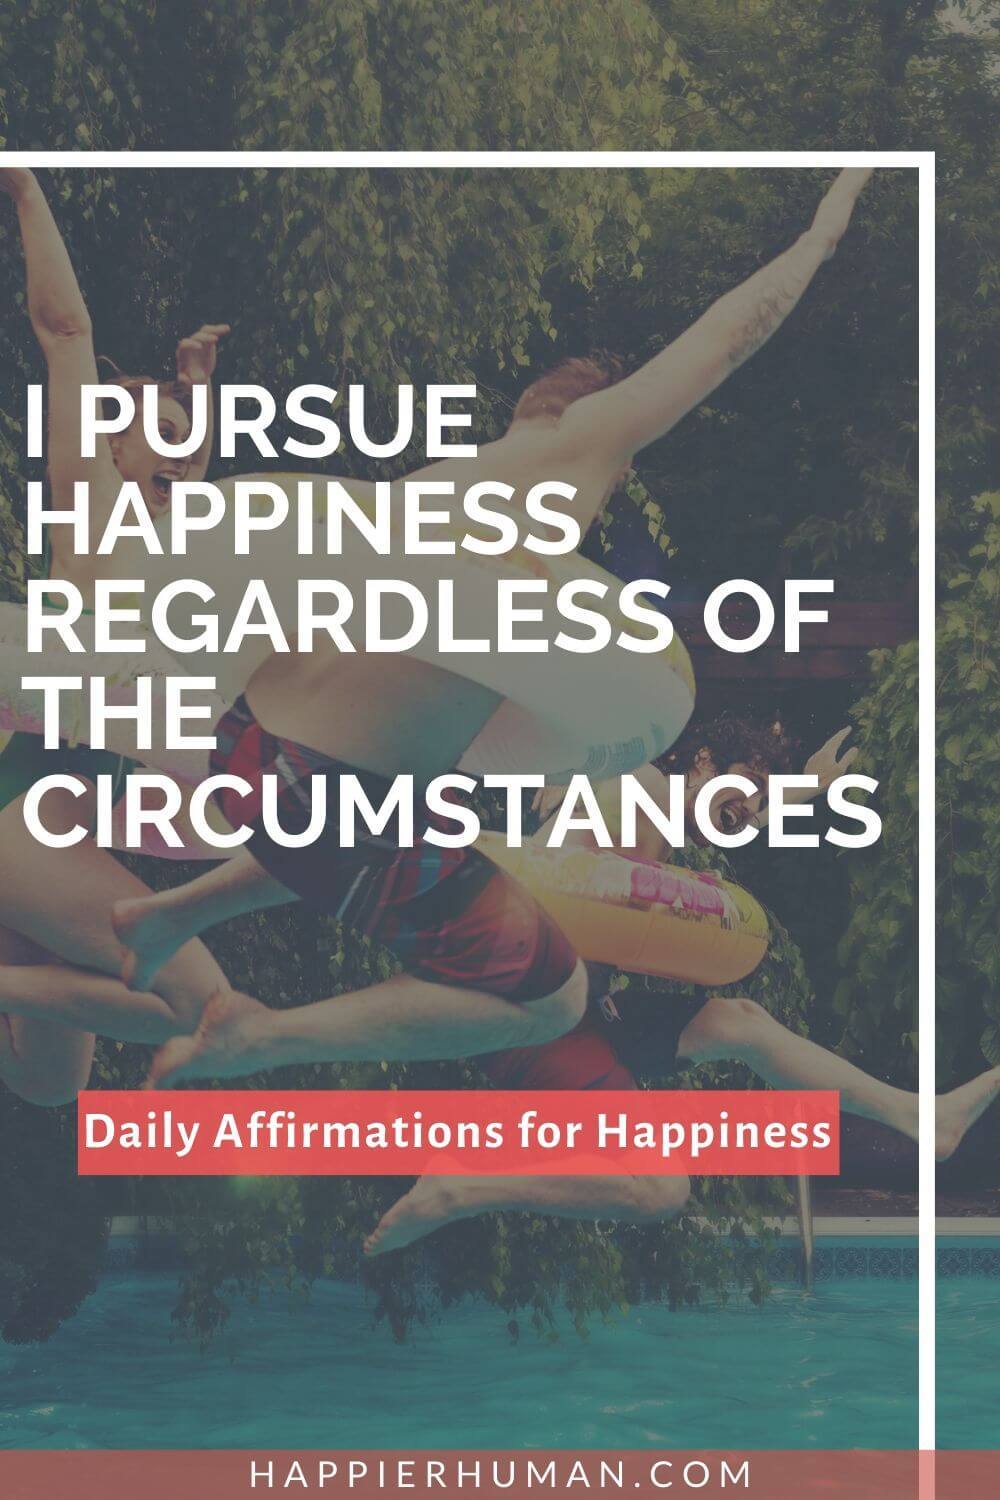 Daily Affirmations for Happiness - I pursue happiness regardless of the circumstances | morning energy affirmations | daily affirmations | what are some good affirmations #happy #dailyaffirmations #affirmationsforagreatlife